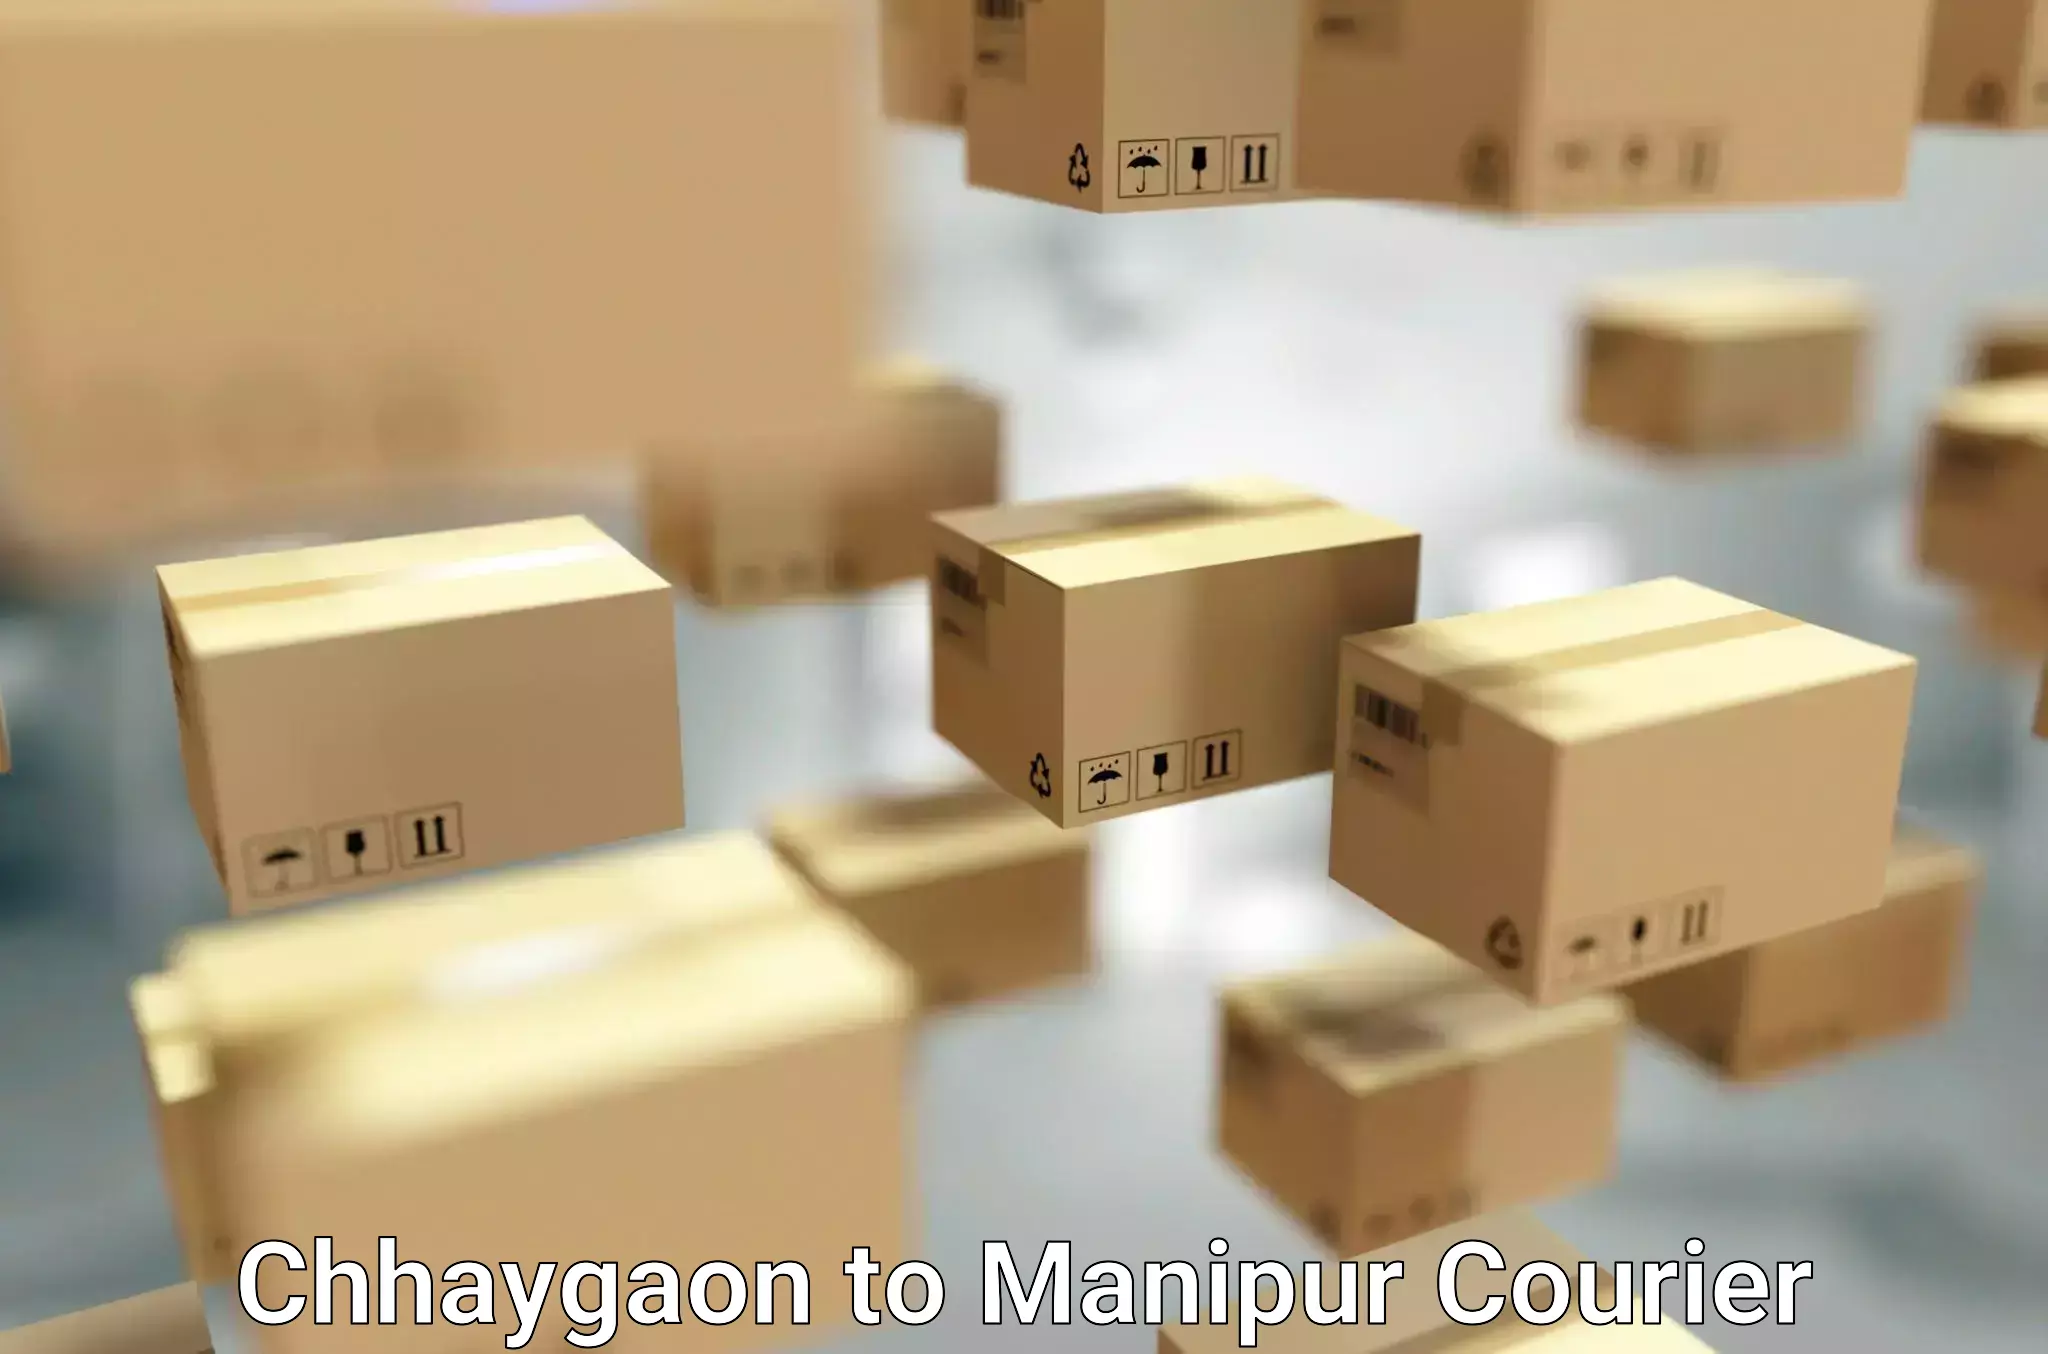 Furniture transport specialists Chhaygaon to Manipur